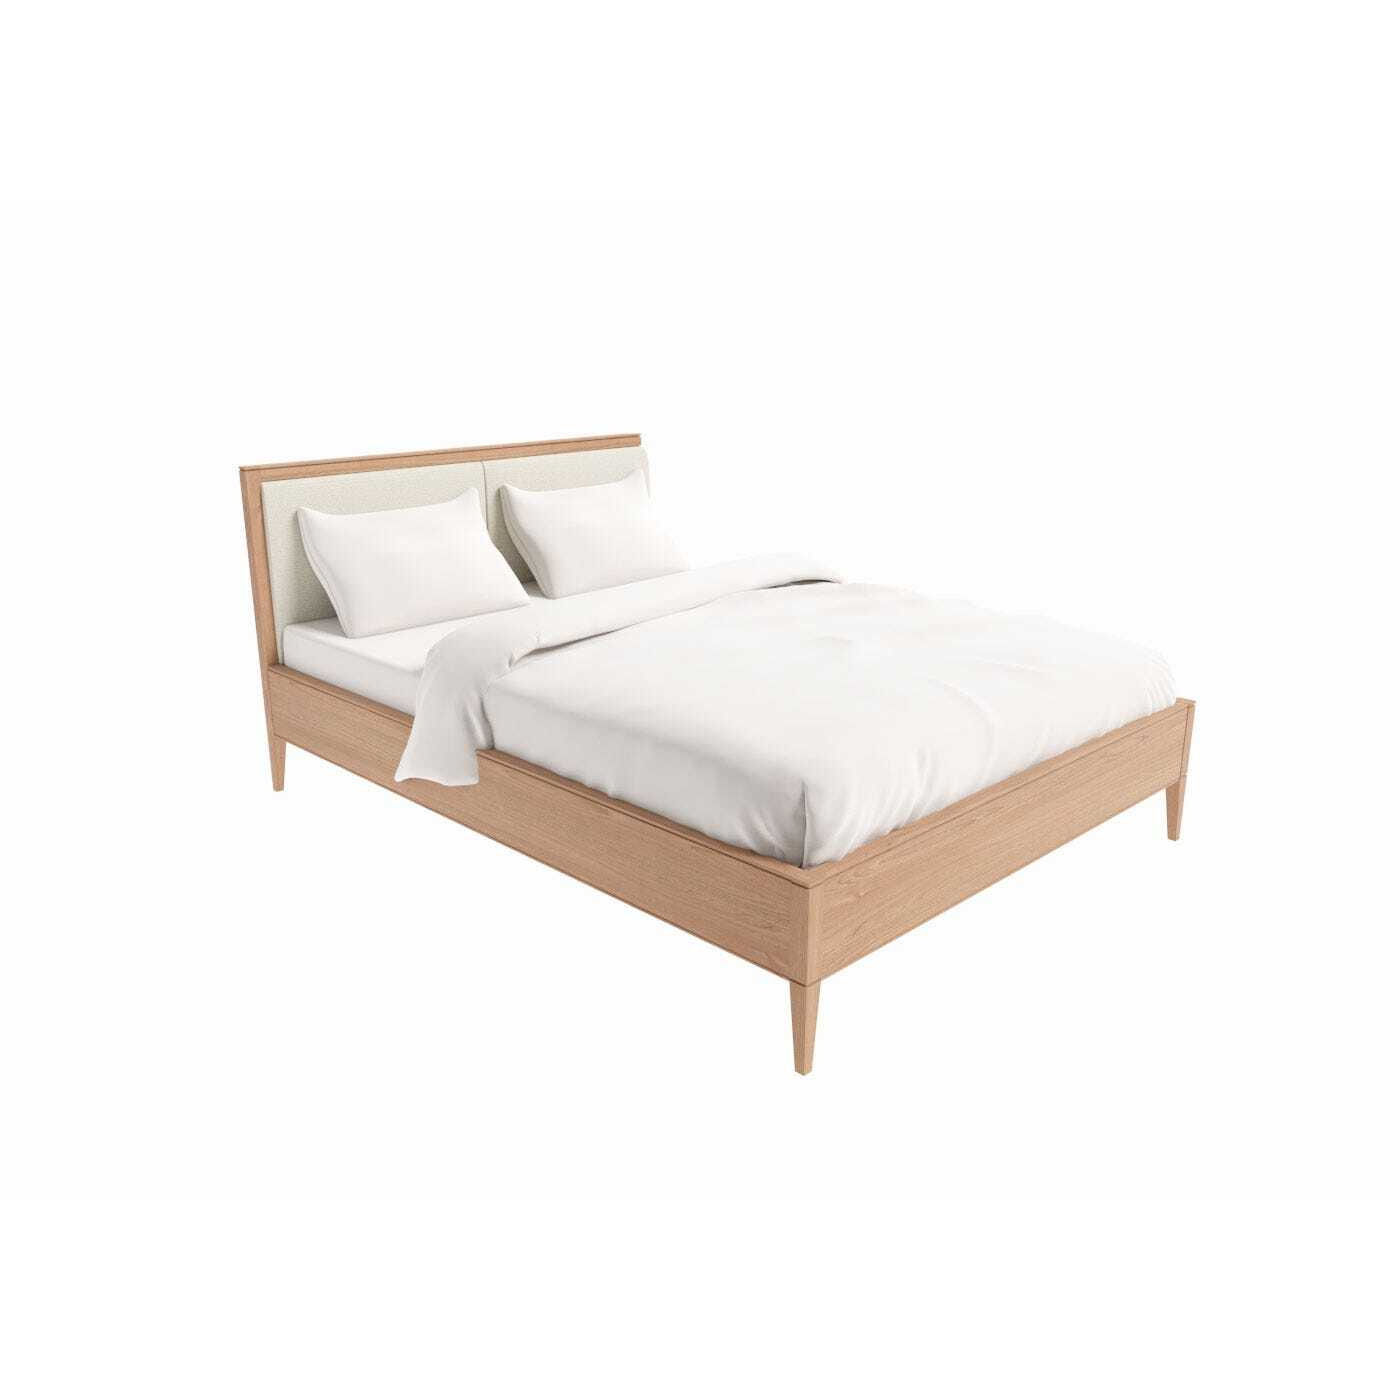 Heal's Lars Bed King Cashmere - image 1